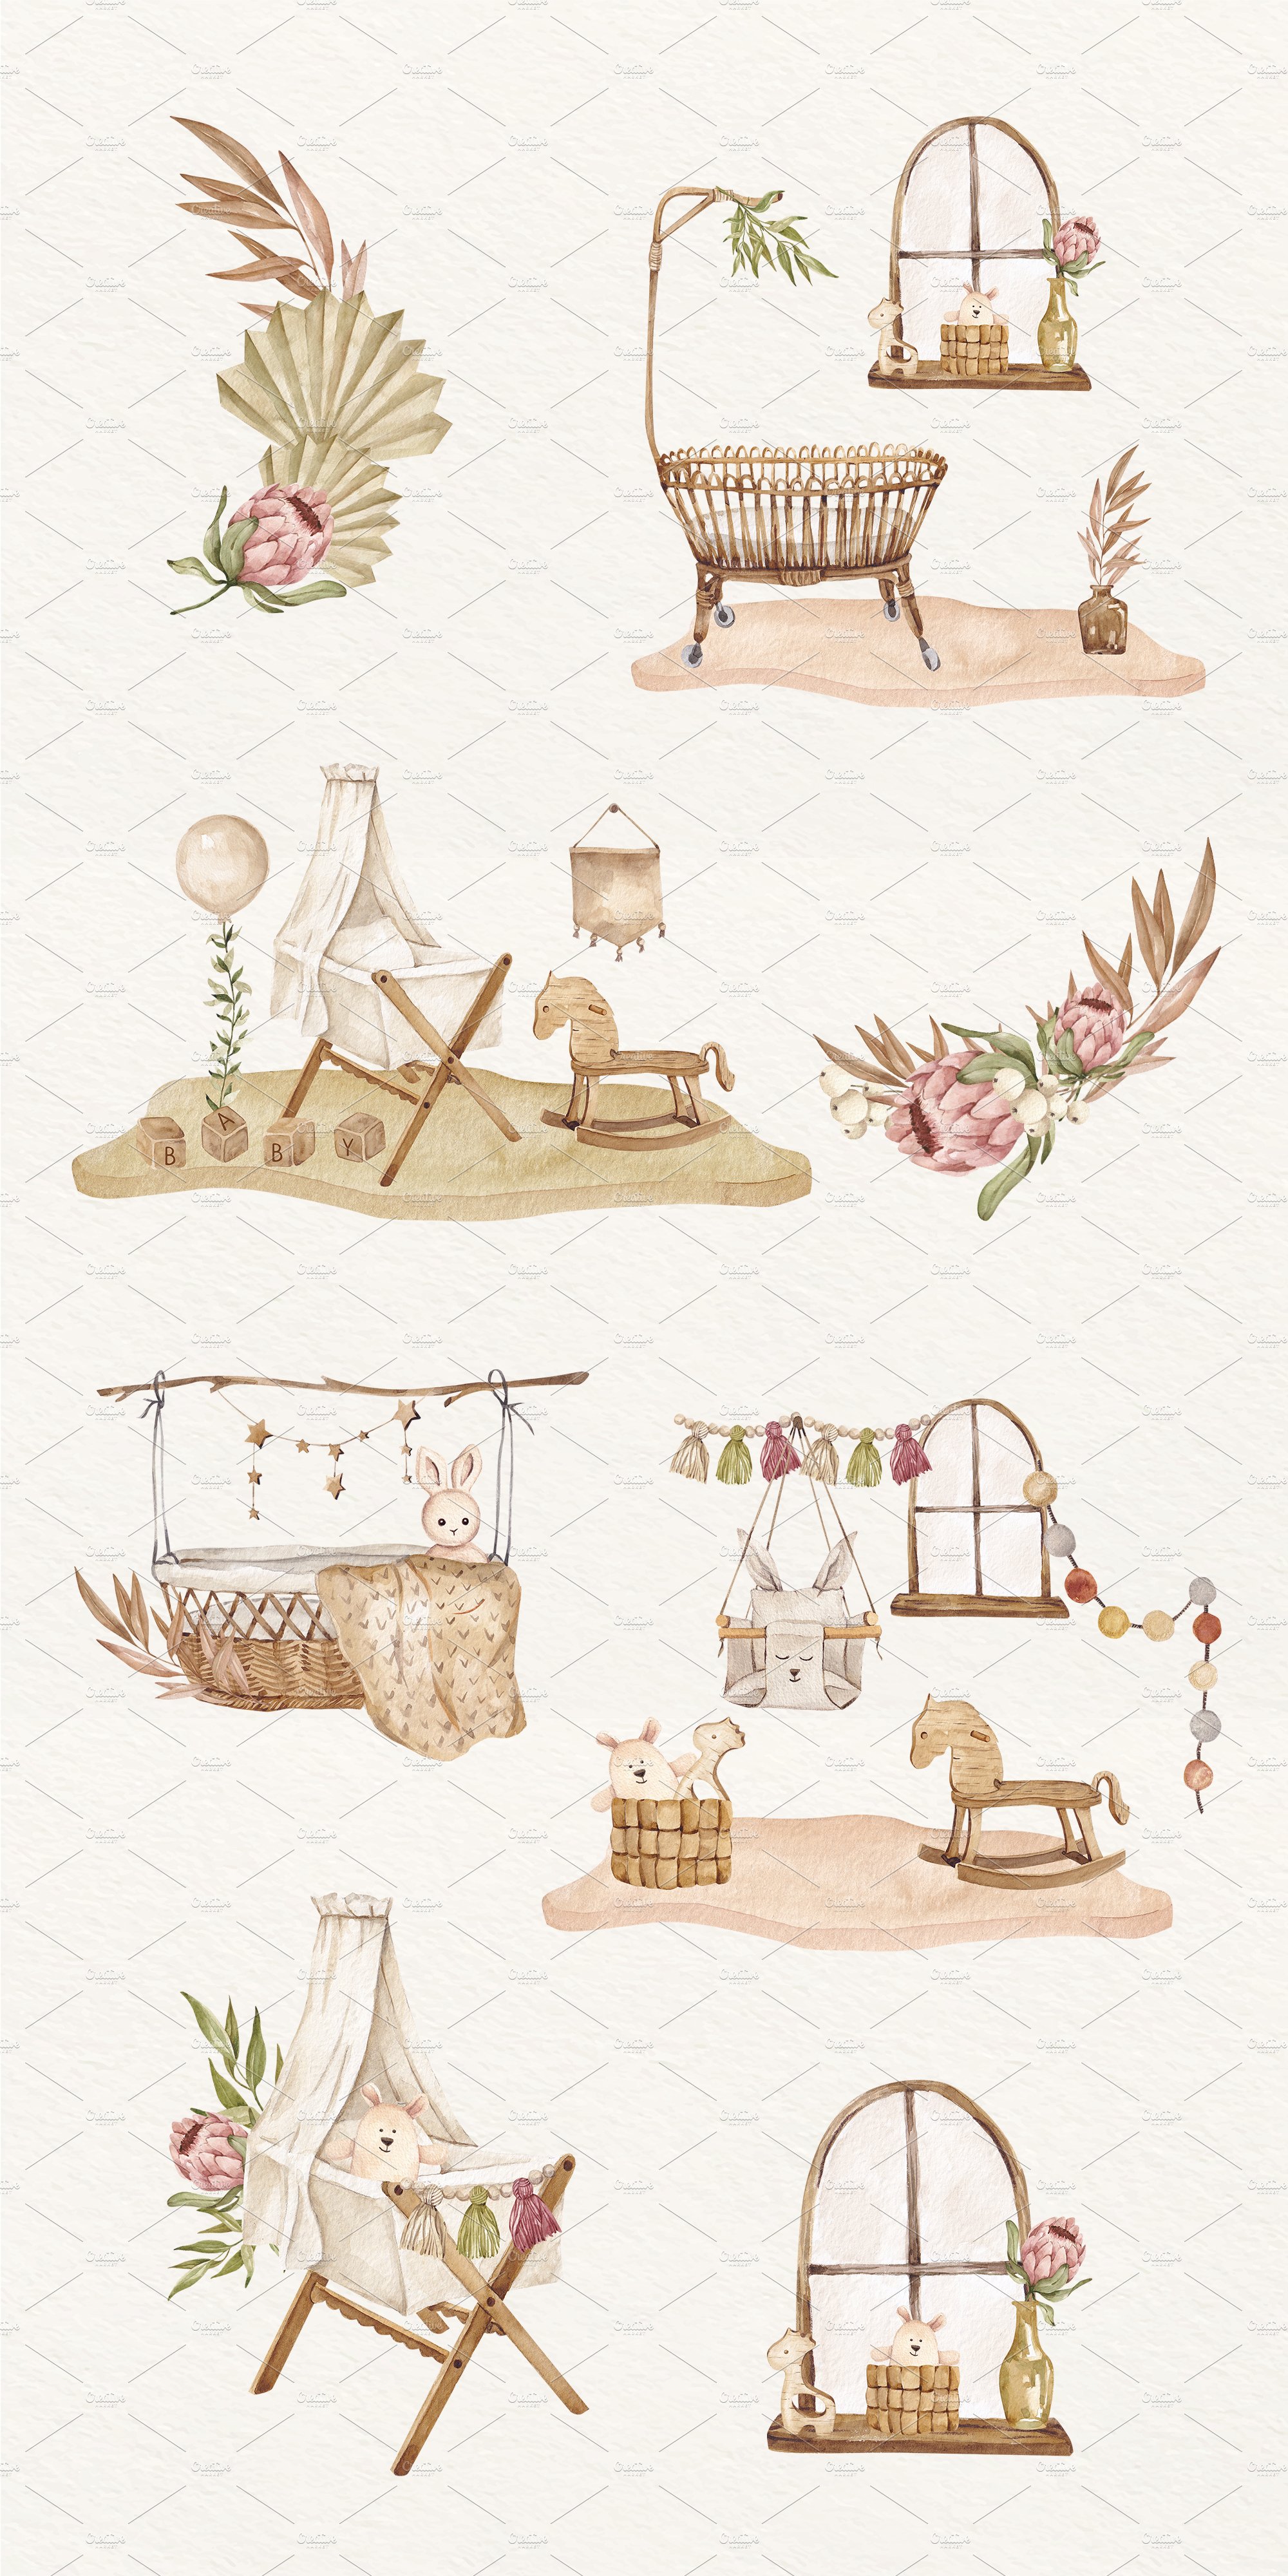 So beautiful and delicate composition for baby topics.